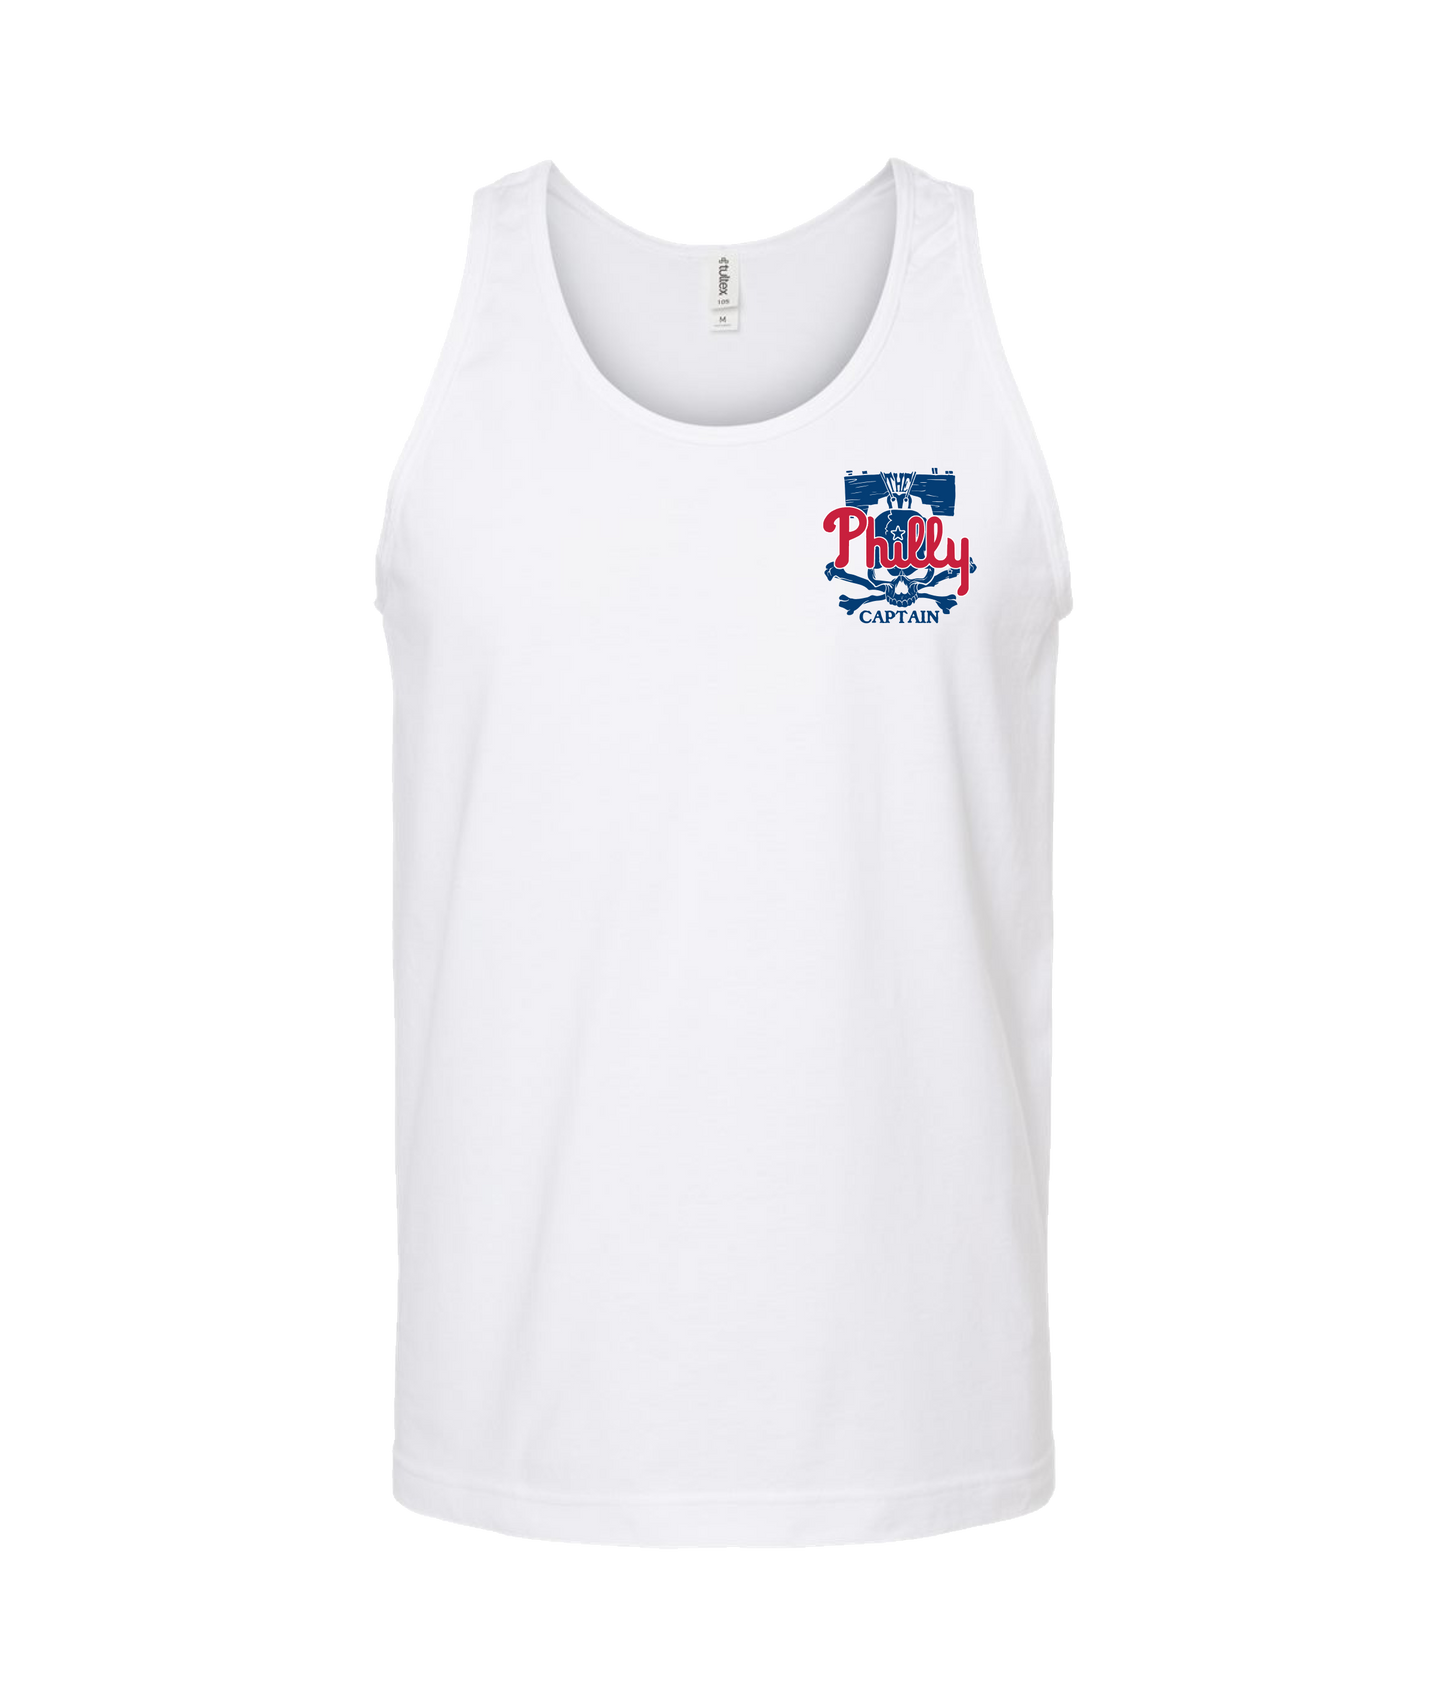 The Philly Captain's Merch is Fire - PHILLY - White Tank Top